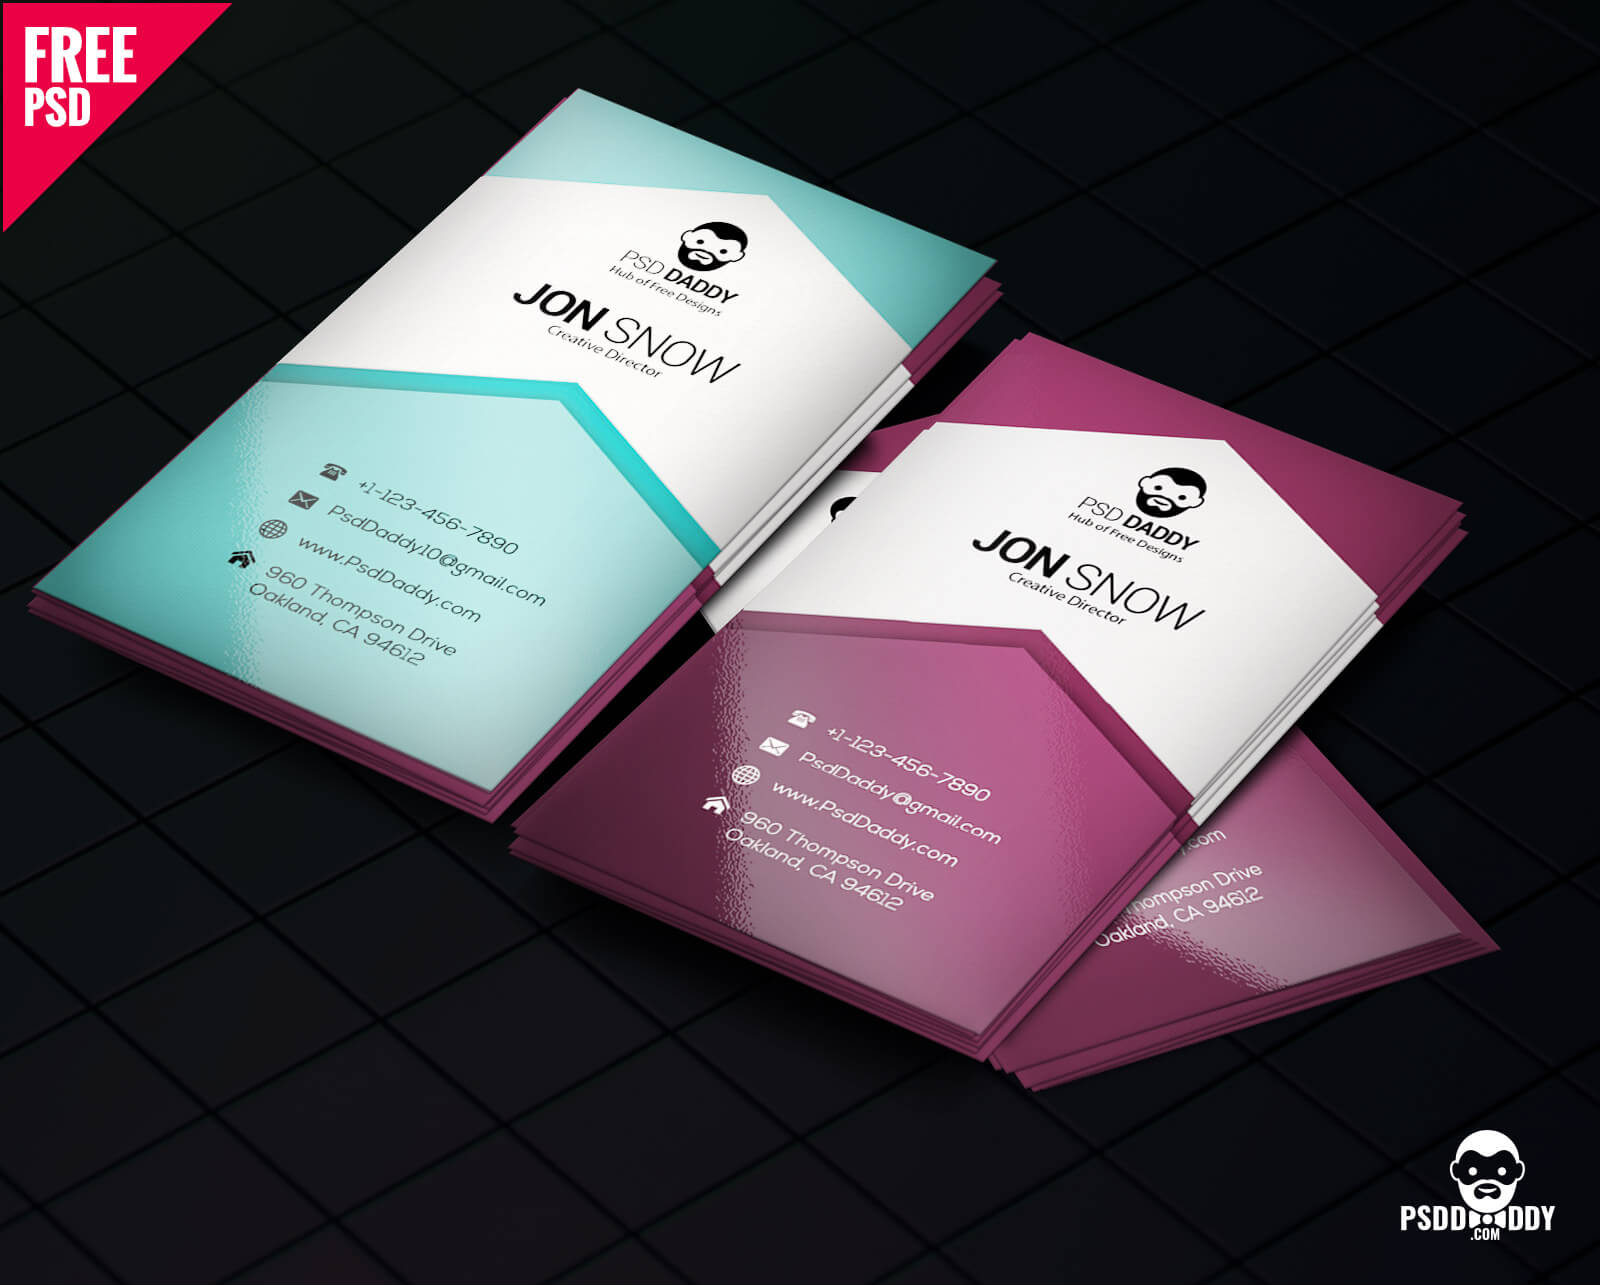 Download]Creative Business Card Psd Free | Psddaddy Throughout Business Card Size Template Photoshop